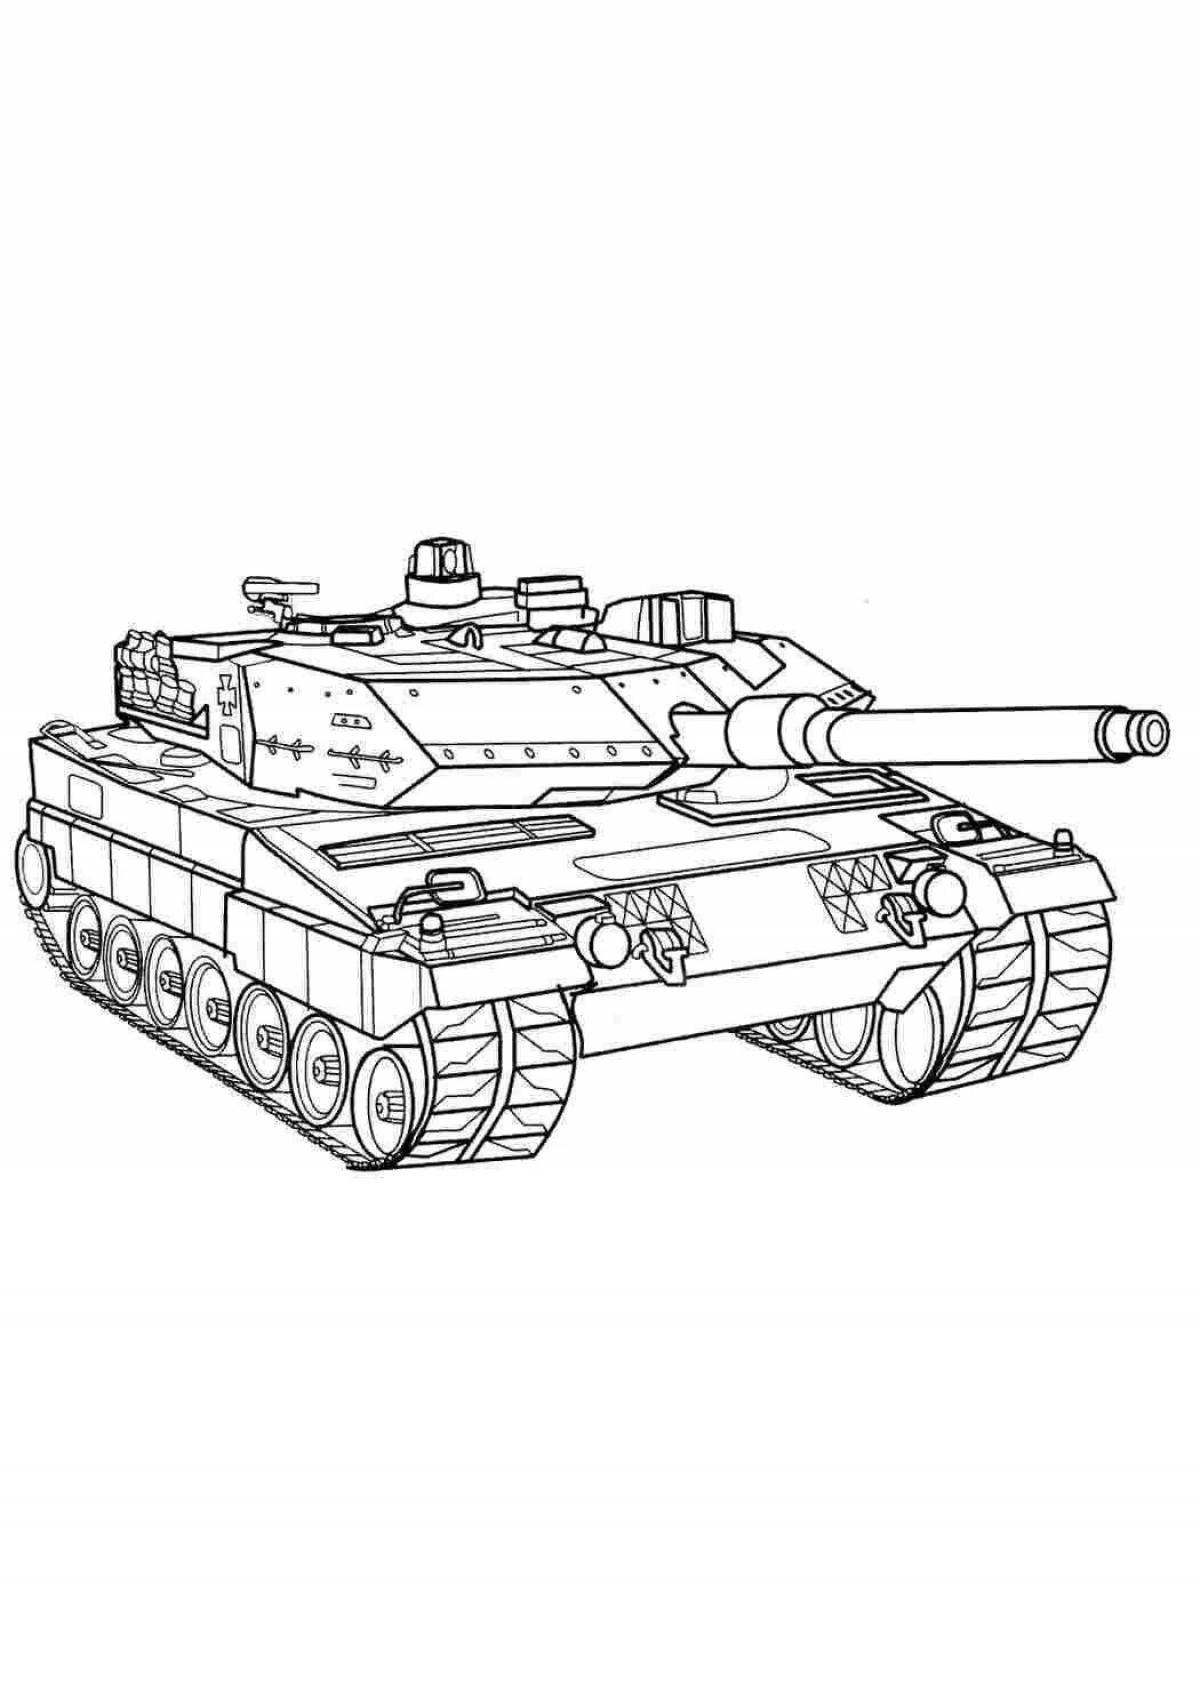 Abrams tank animated coloring page